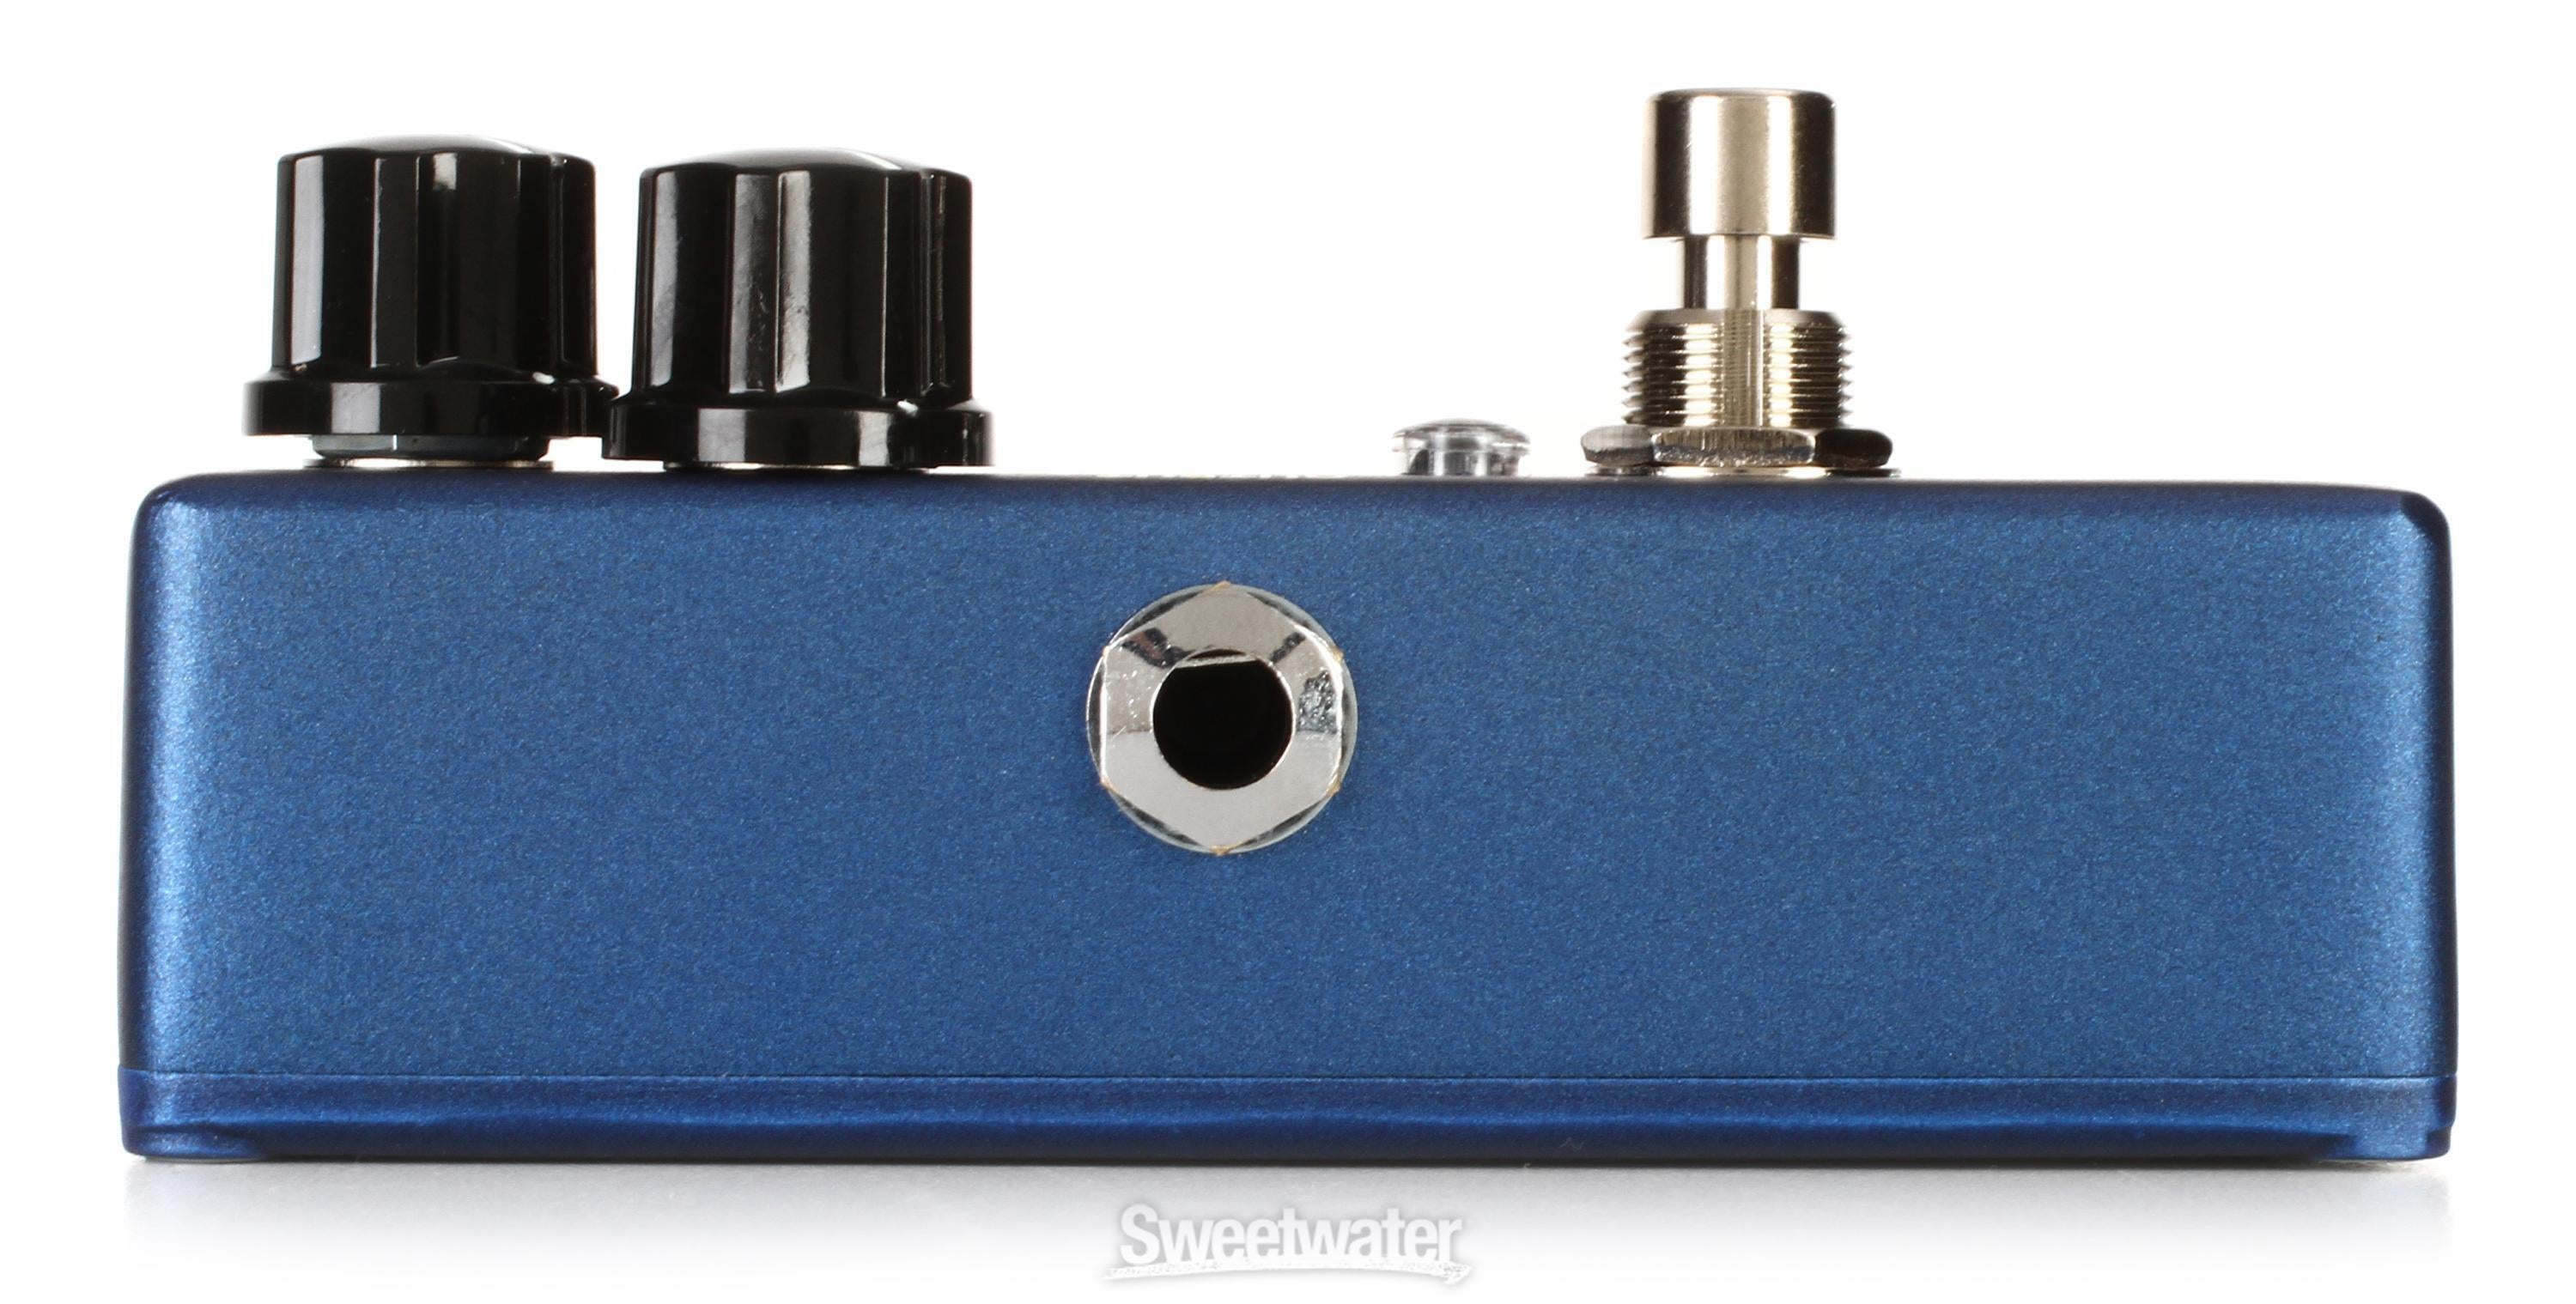 MXR CSP036 IL Diavolo Overdrive Pedal Reviews | Sweetwater